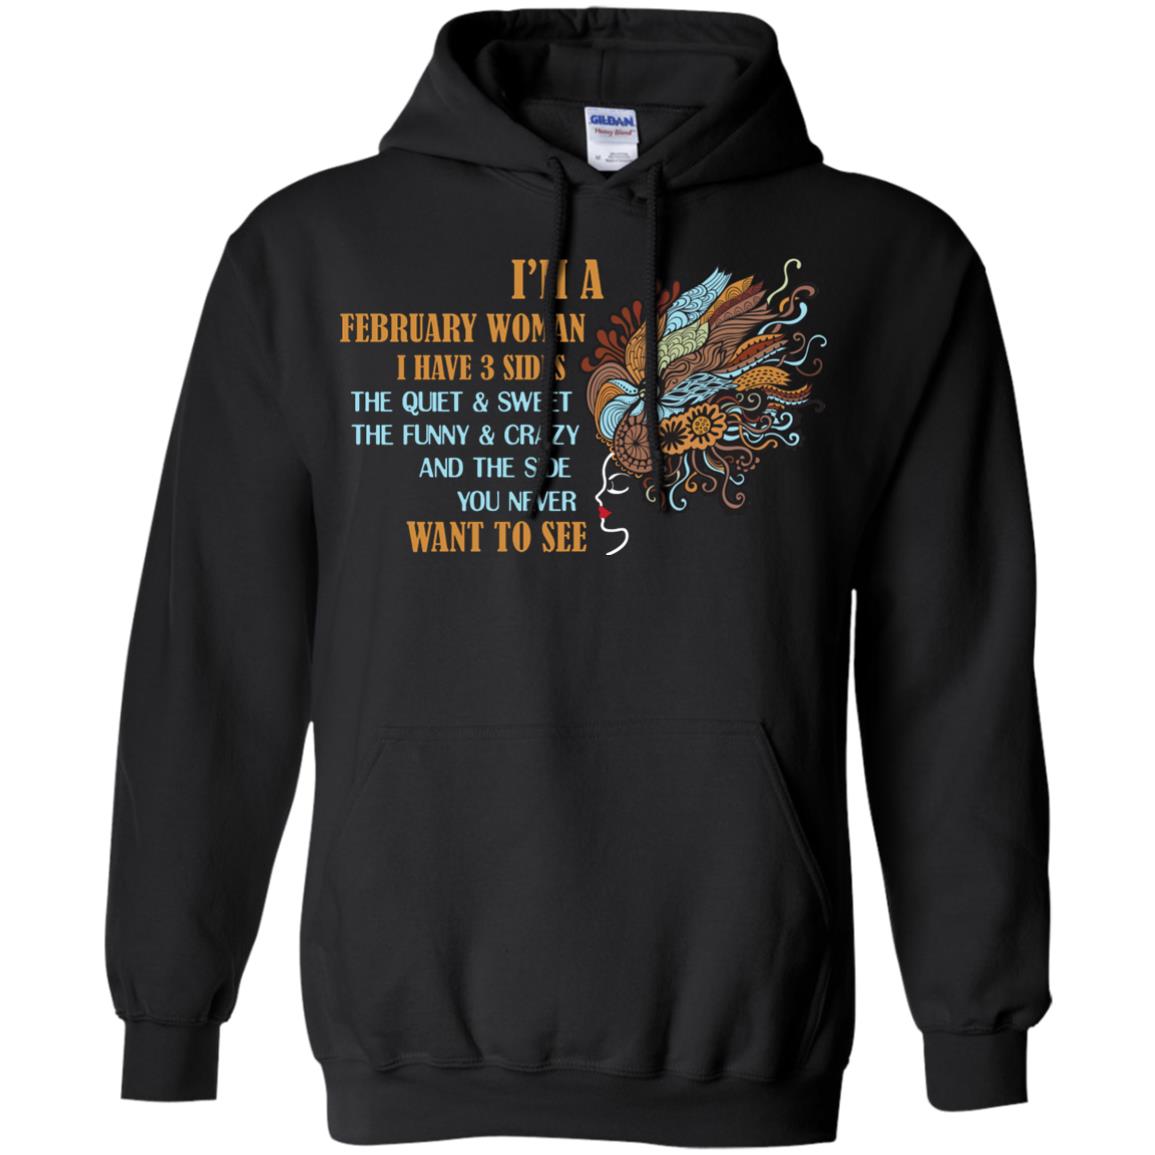 I'm A February Woman I Have 3 Sides The Quite And Sweet The Funny And Crazy And The Side You Never Want To SeeG185 Gildan Pullover Hoodie 8 oz.